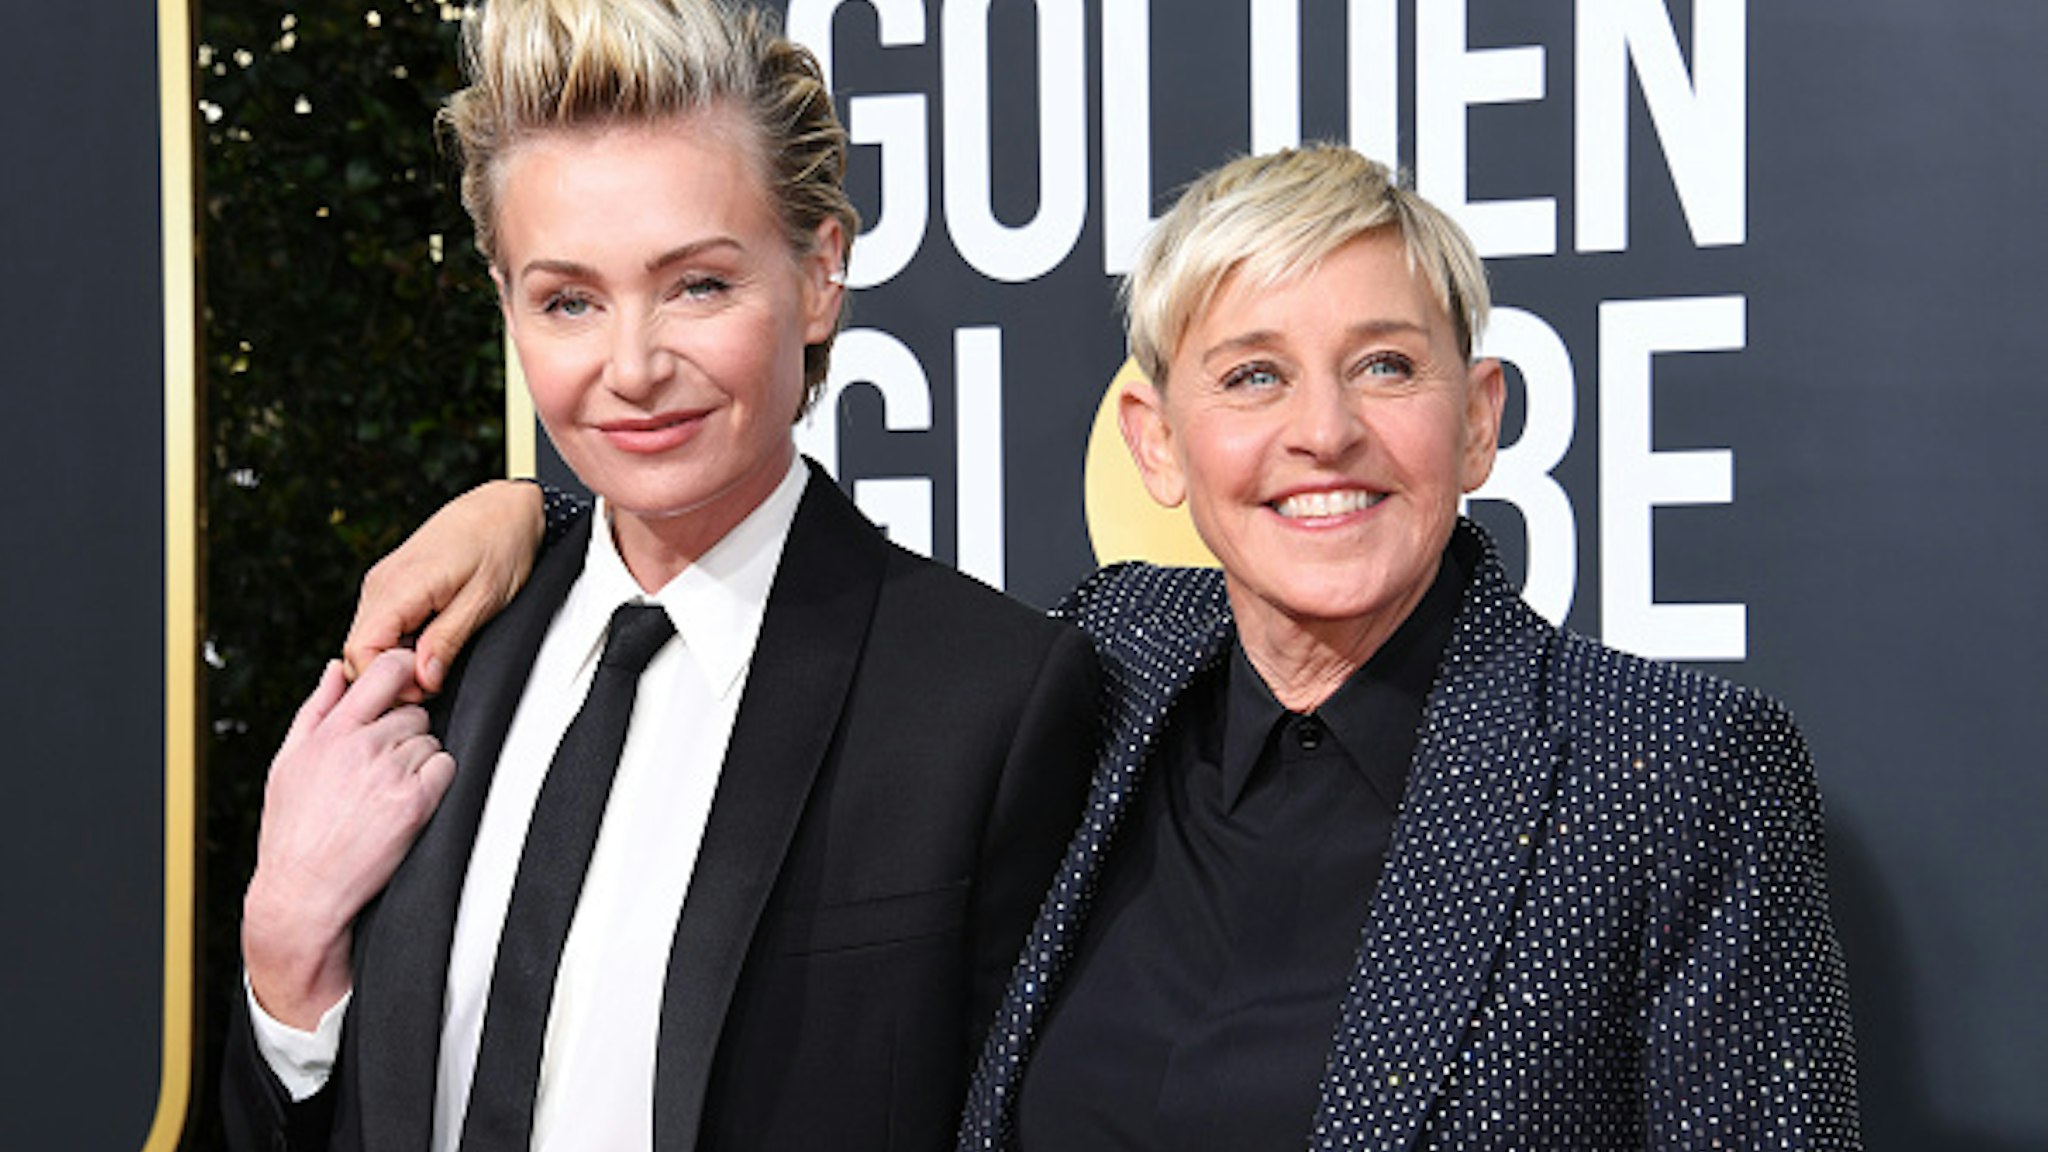 BEVERLY HILLS, CALIFORNIA - JANUARY 05: (L-R) Portia de Rossi and Ellen DeGeneres attend the 77th Annual Golden Globe Awards at The Beverly Hilton Hotel on January 05, 2020 in Beverly Hills, California.